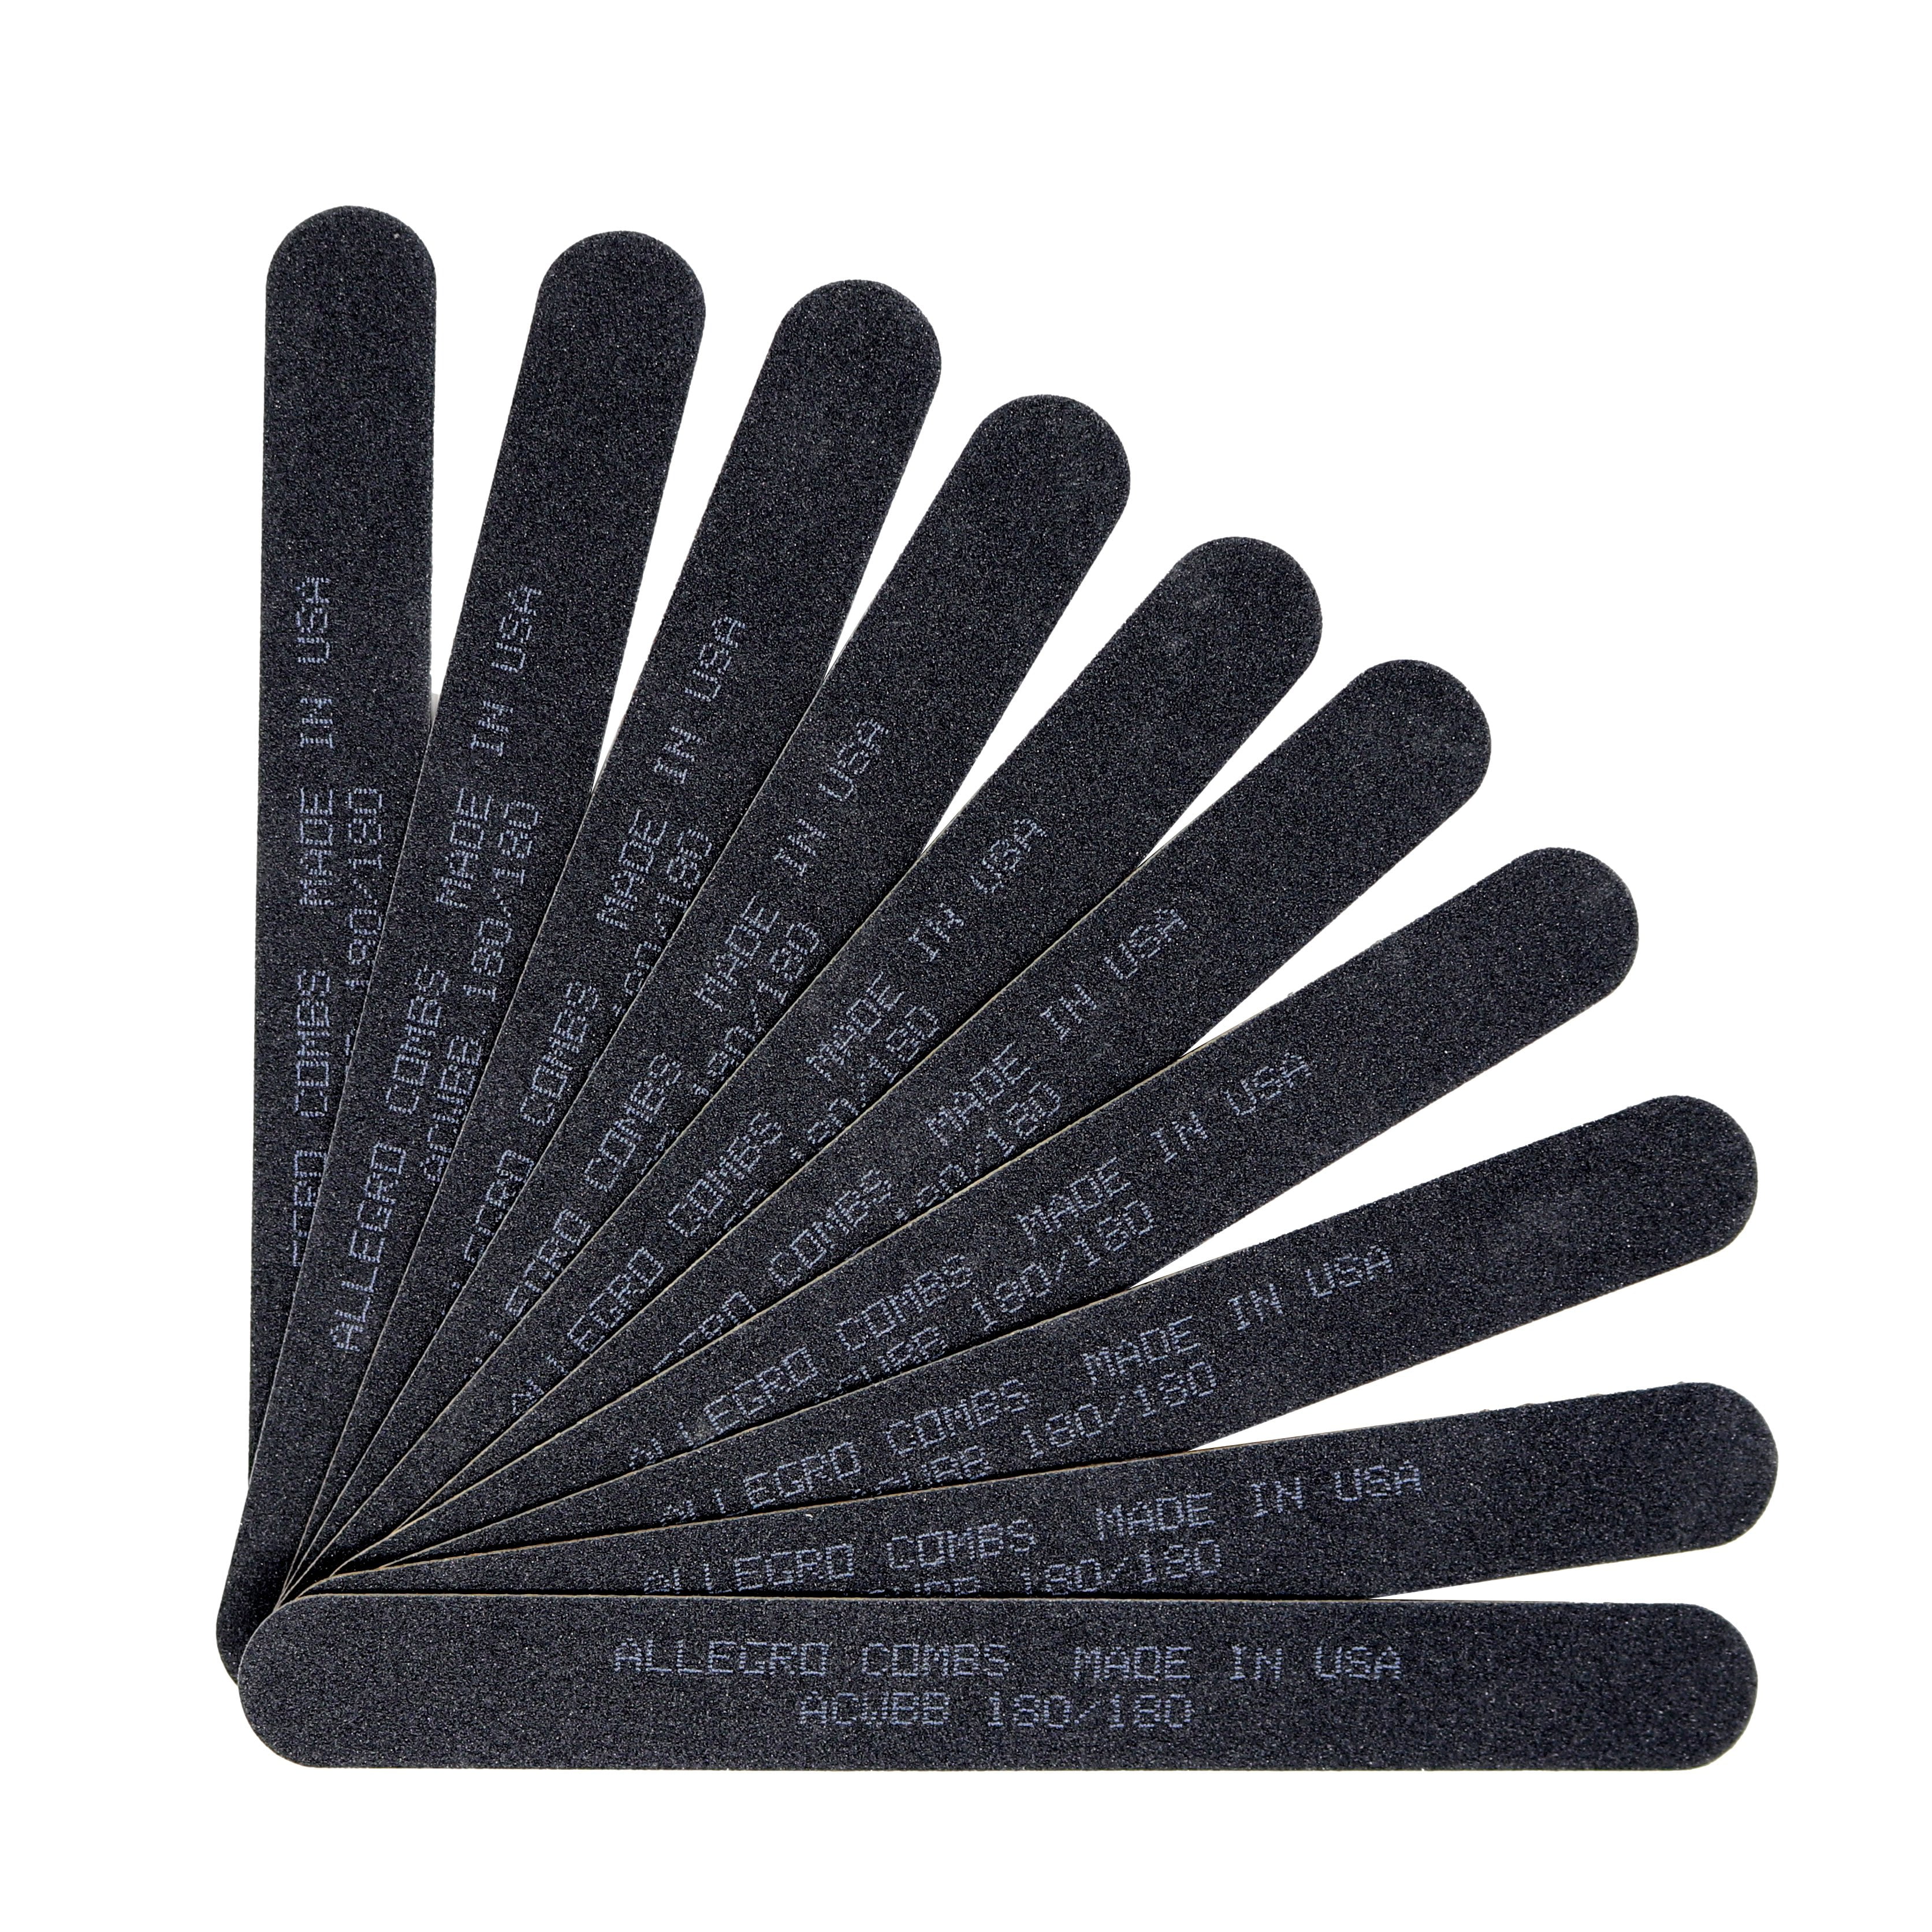 Mom hue client Allegro Combs 7 In. Nail Files Double Sided Wooden Emery Boards For Natural  and Acrylic Grit 180 Black USA. 10 Pcs. - Walmart.com